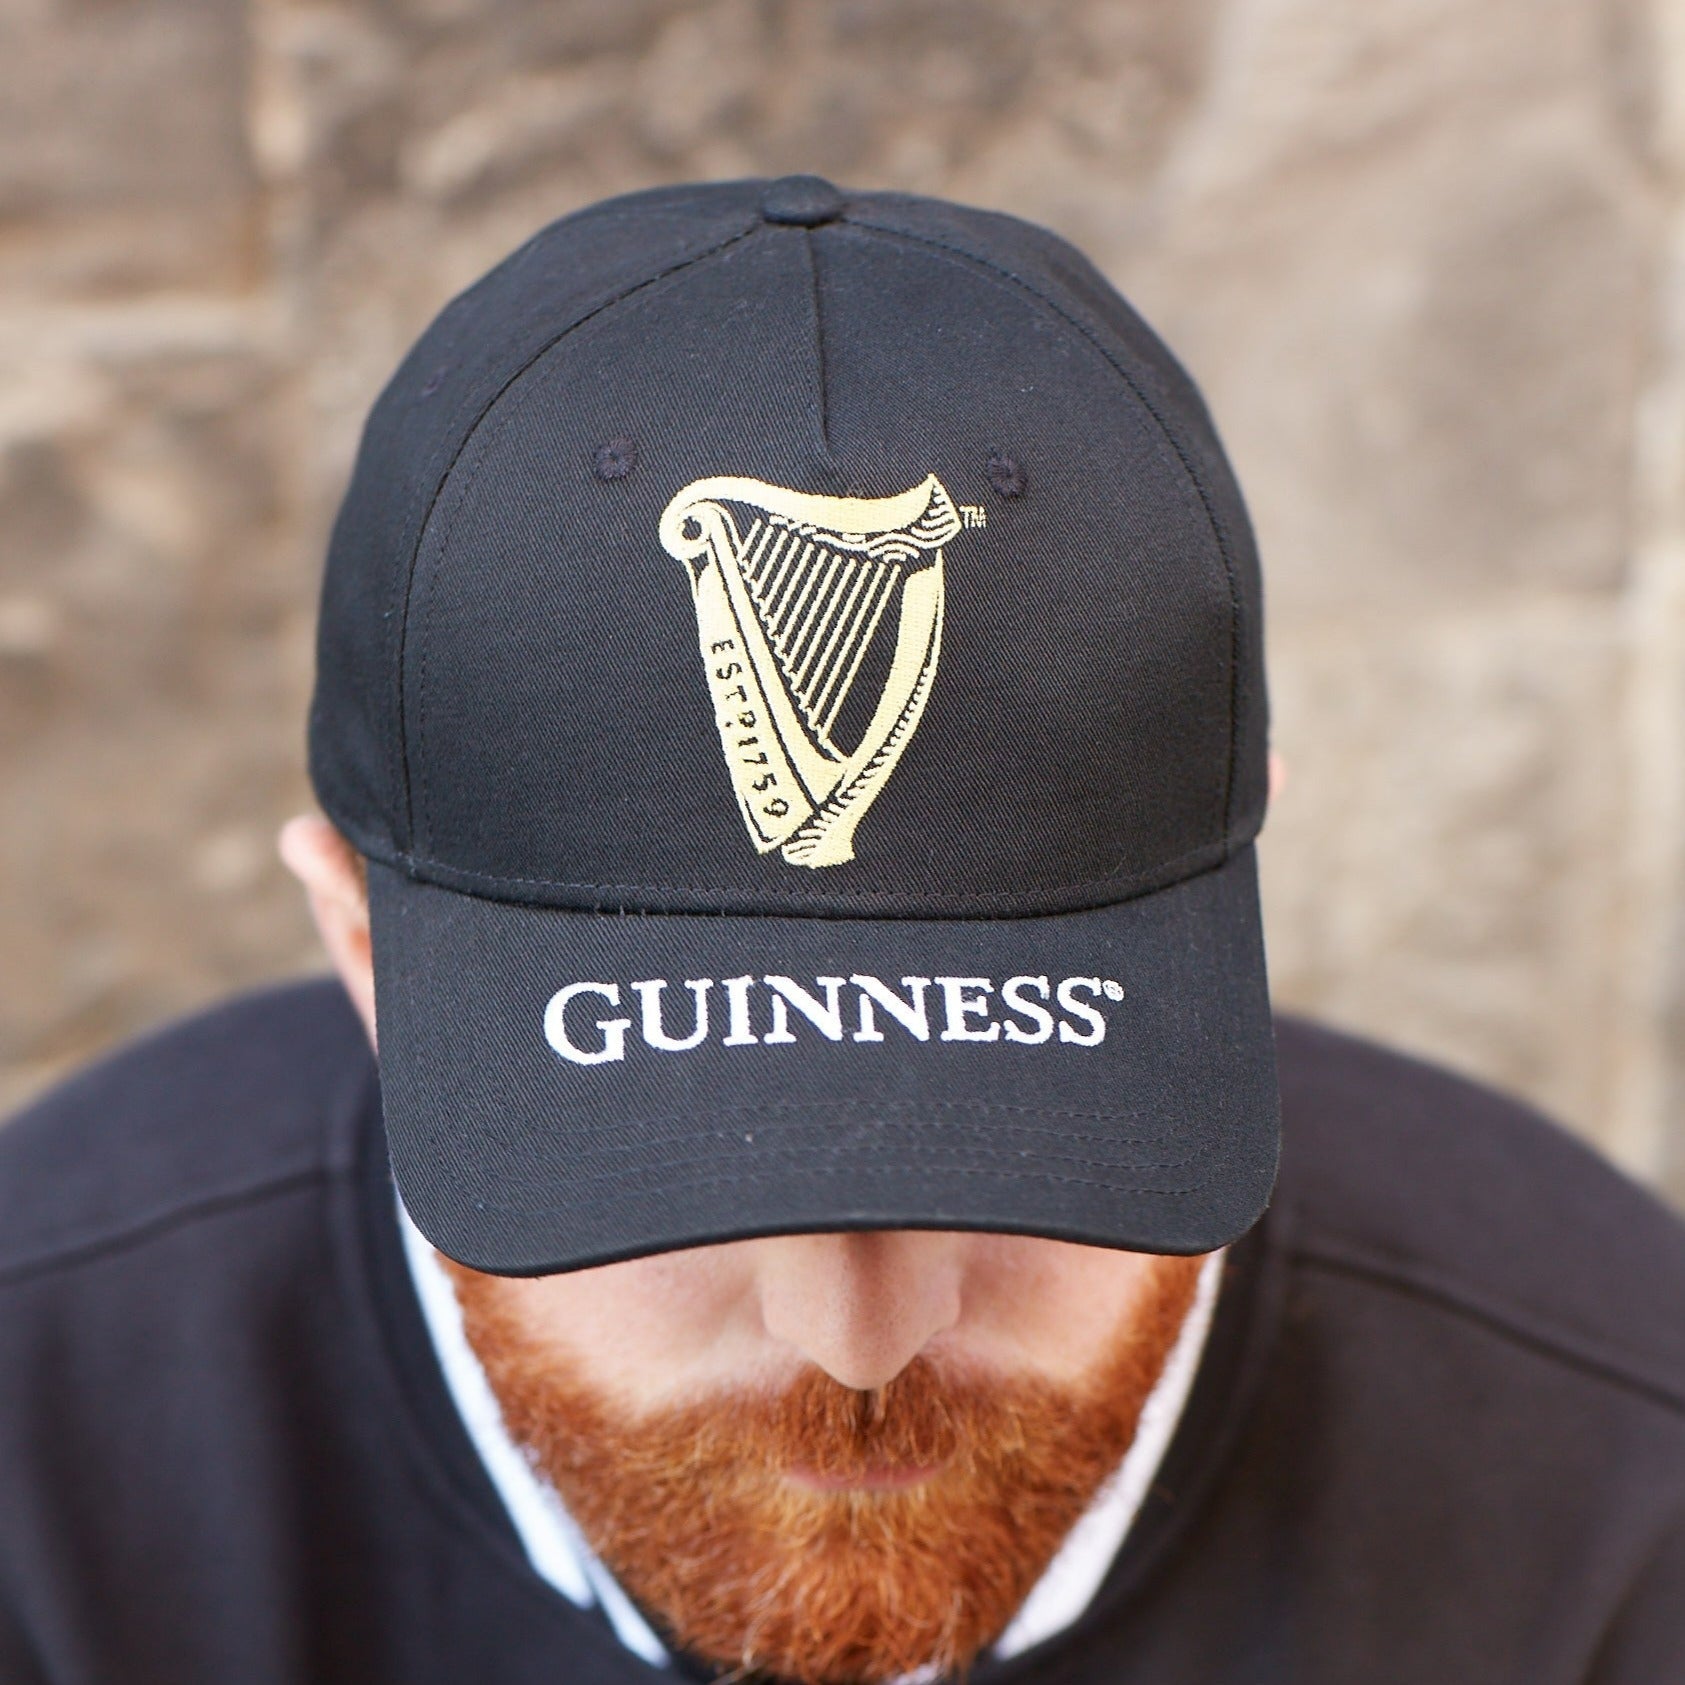 A man with a red beard wearing a Guinness hat and a Guinness Harp Baseball Cap made of cotton.